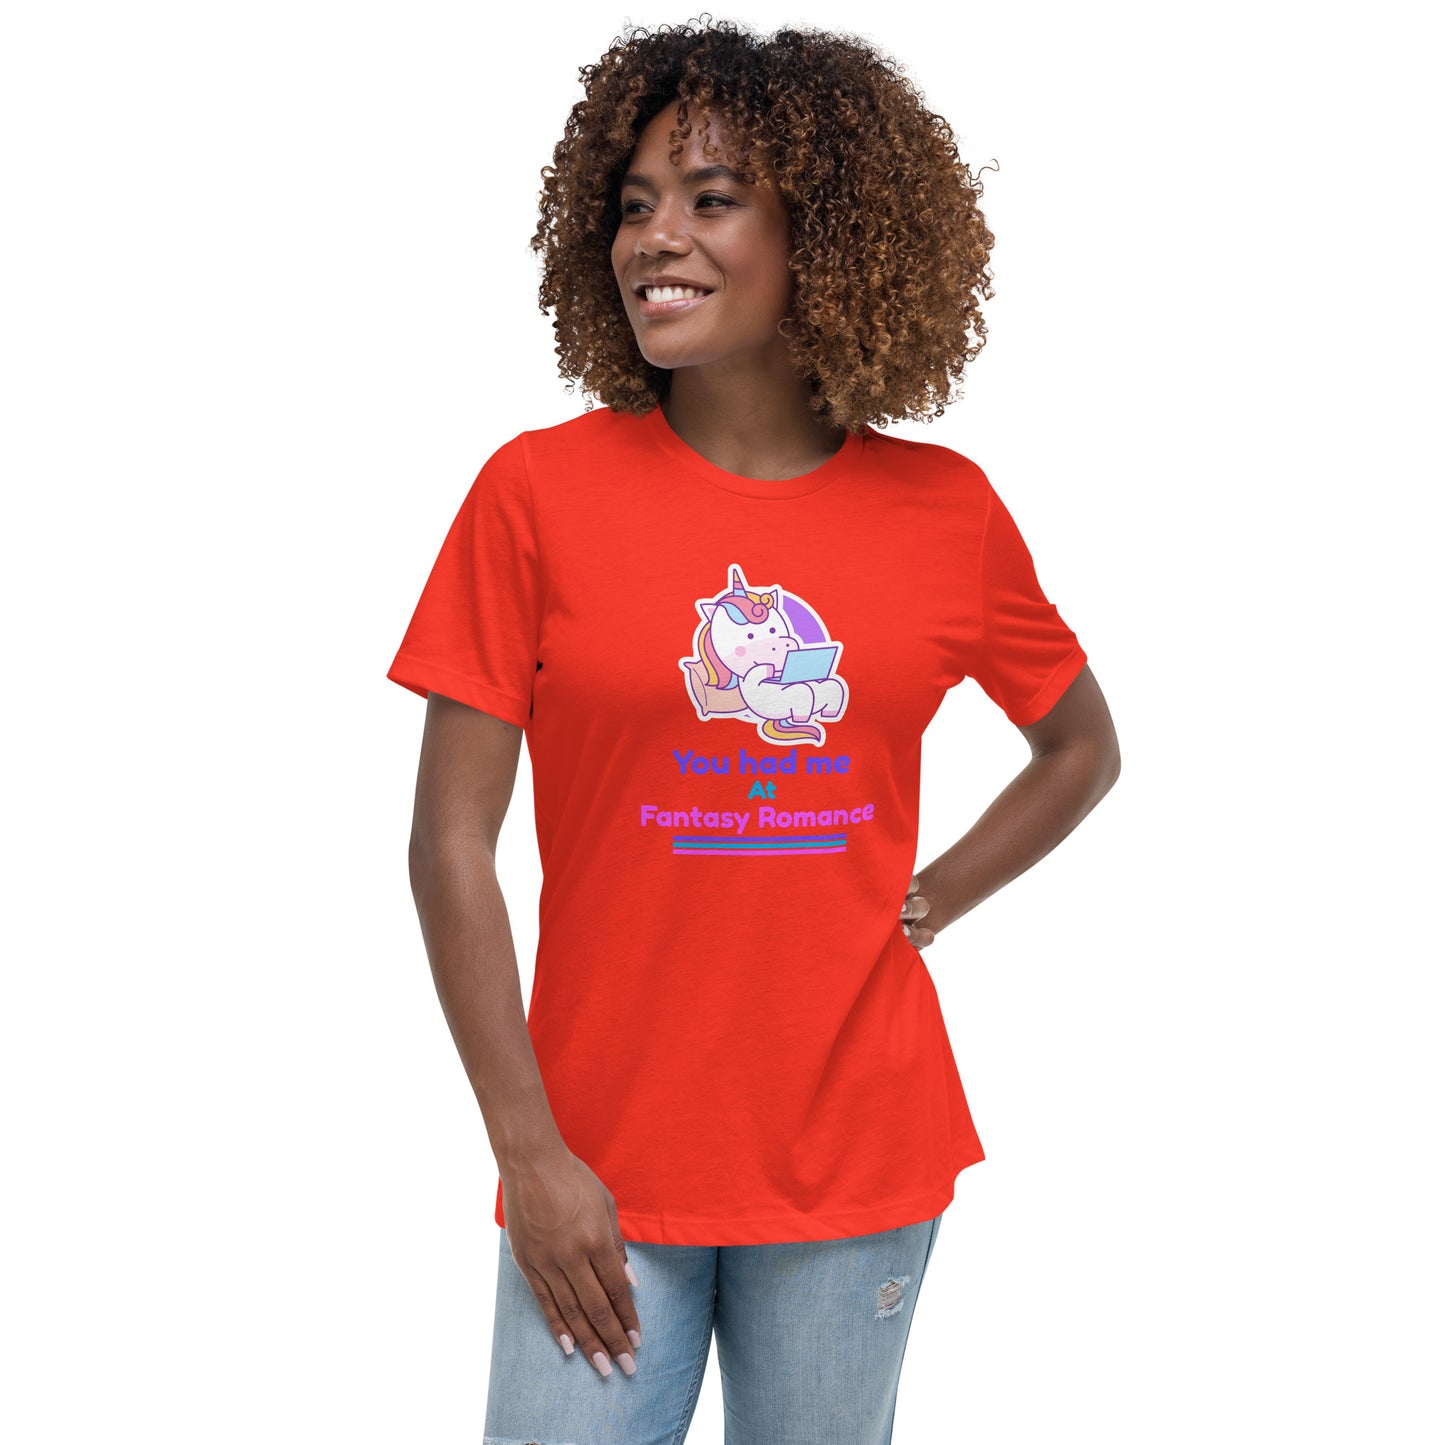 Women's Relaxed T-Shirt You had me at Fantasy Romance